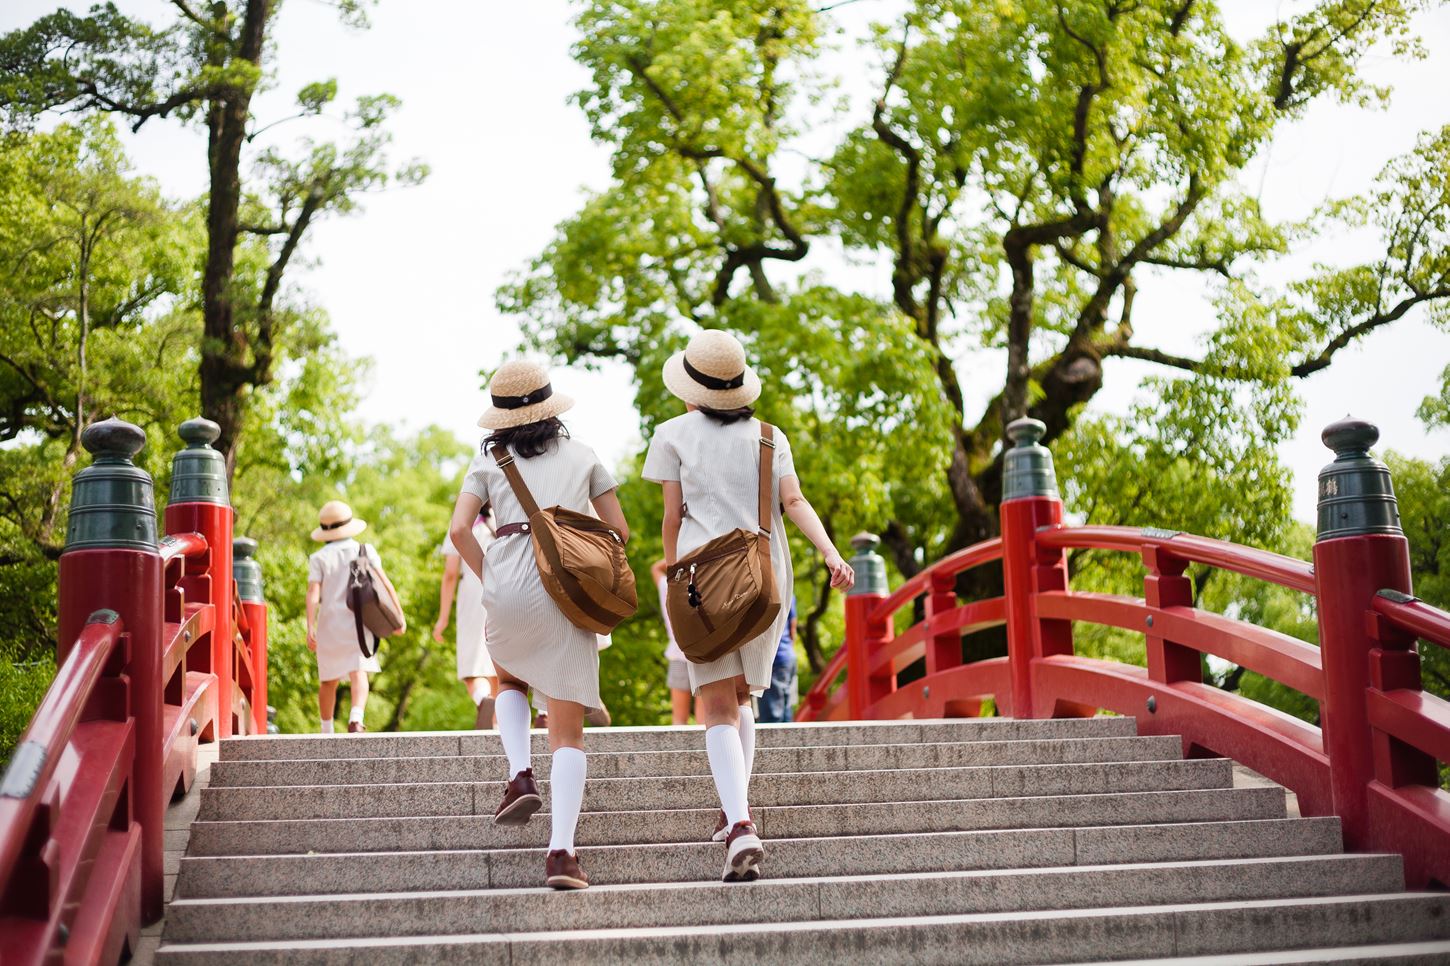 Sightseeing scenery that simply shows the weather and clothes in Fukuoka in July4